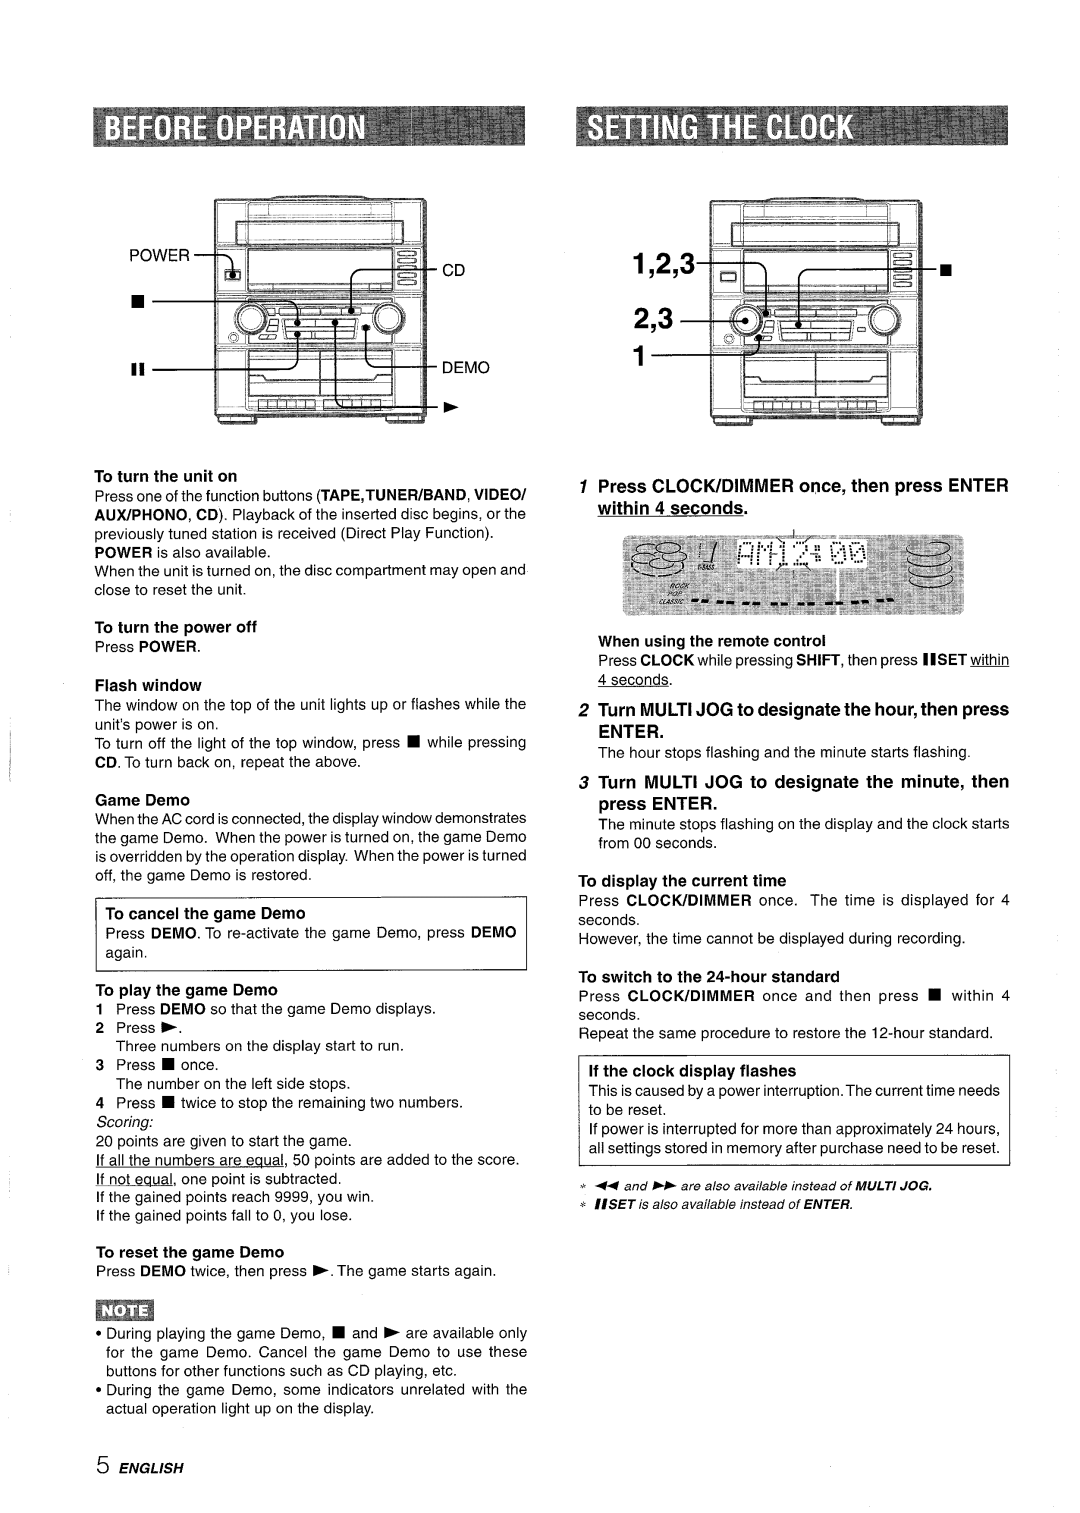 Aiwa Z-R555 manual To turn the unit on, Press CLOCtVDIMMER once, then press ENTER within 4 seconds, To turn the power off 